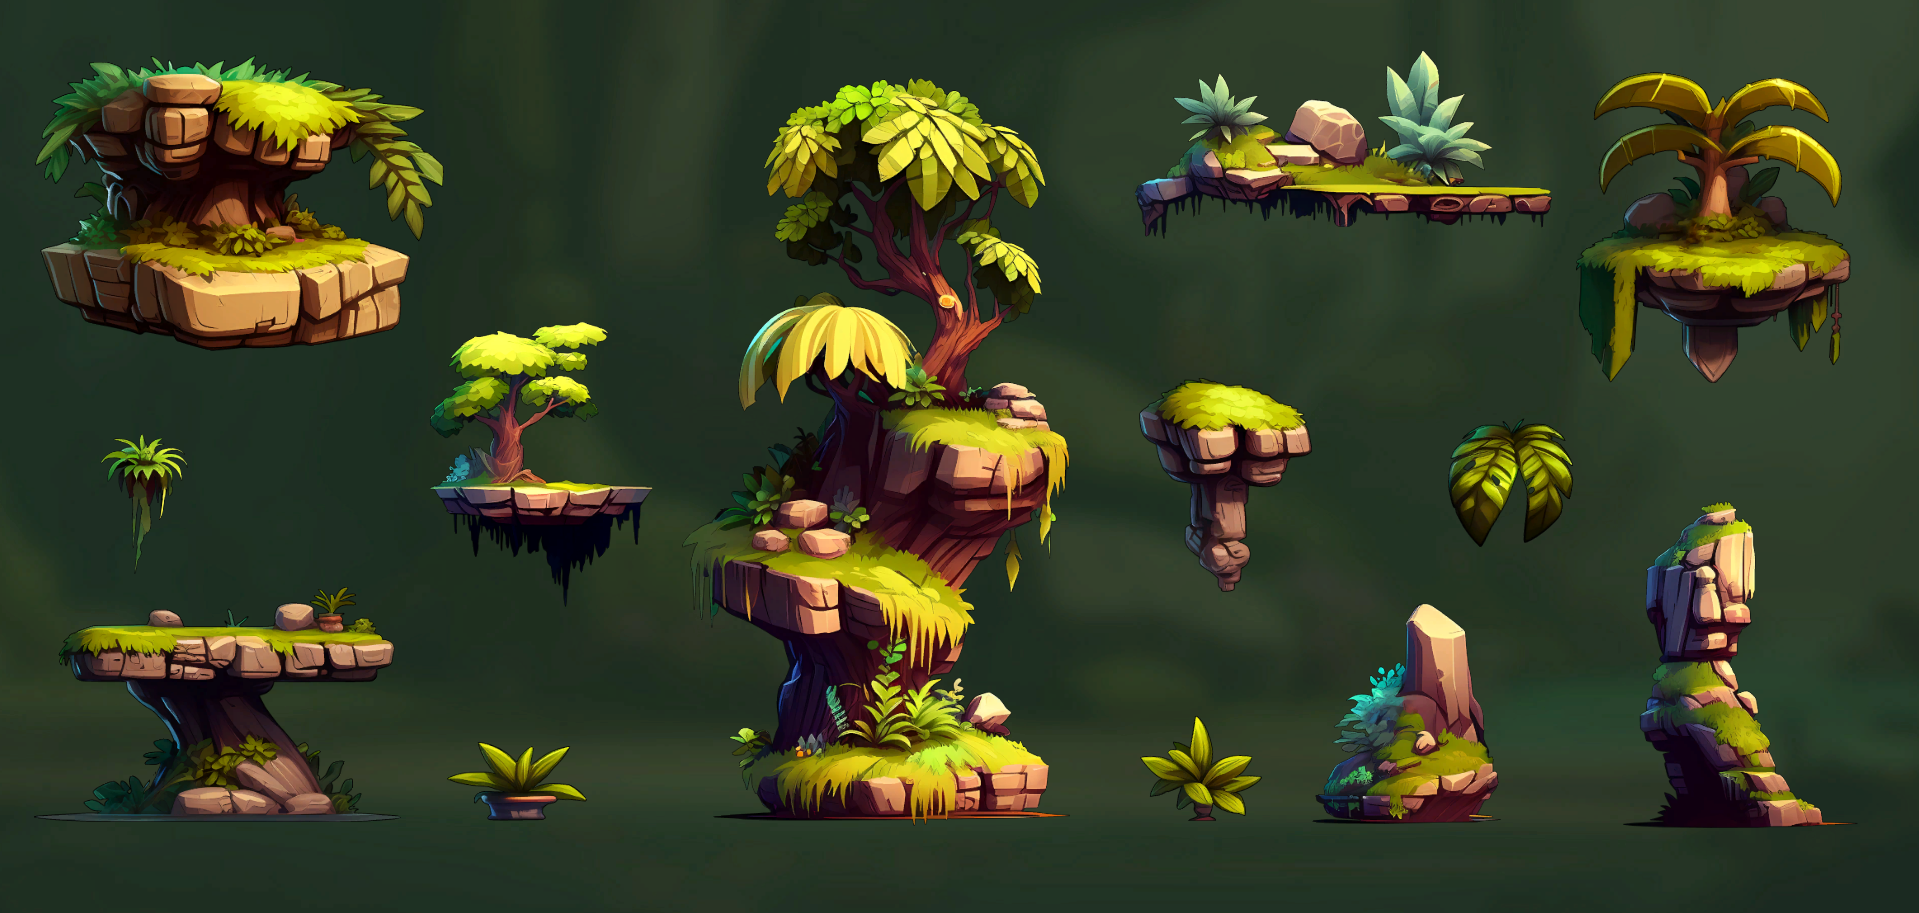 Animated 2d Jungle Platformer Game Ready Environments Asset